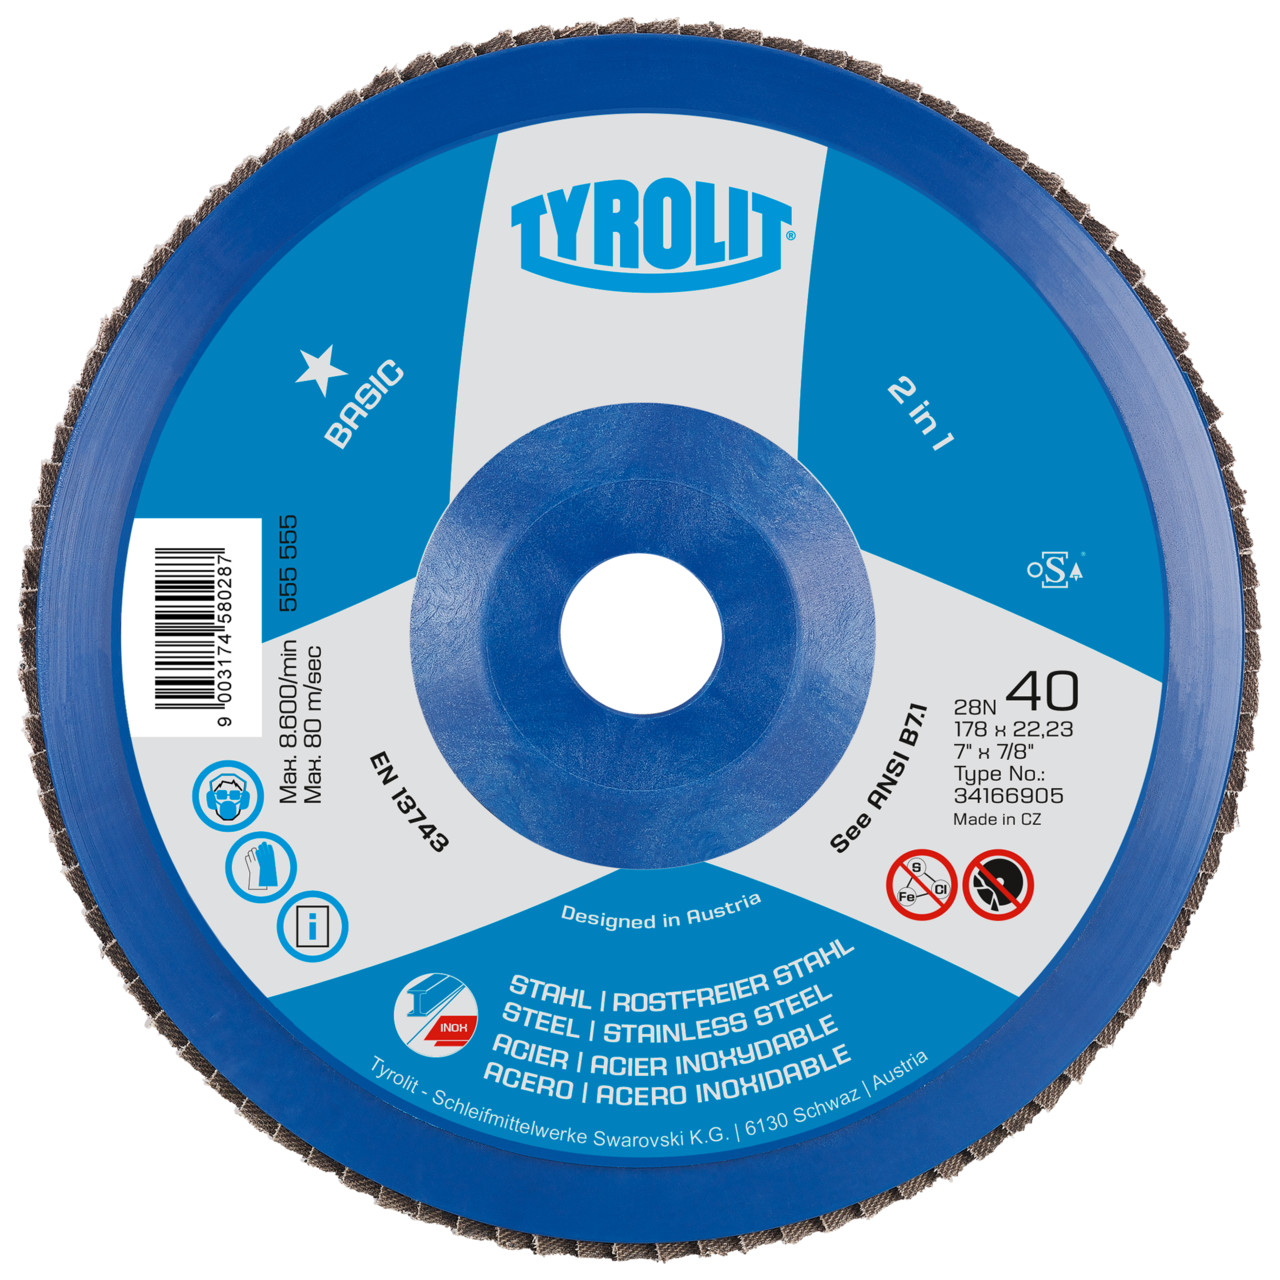 Tyrolit Serrated lock washer DxH 178x22.23 2in1 for steel &amp; stainless steel, P80, shape: 28N - straight version (plastic carrier body), Art. 34318580